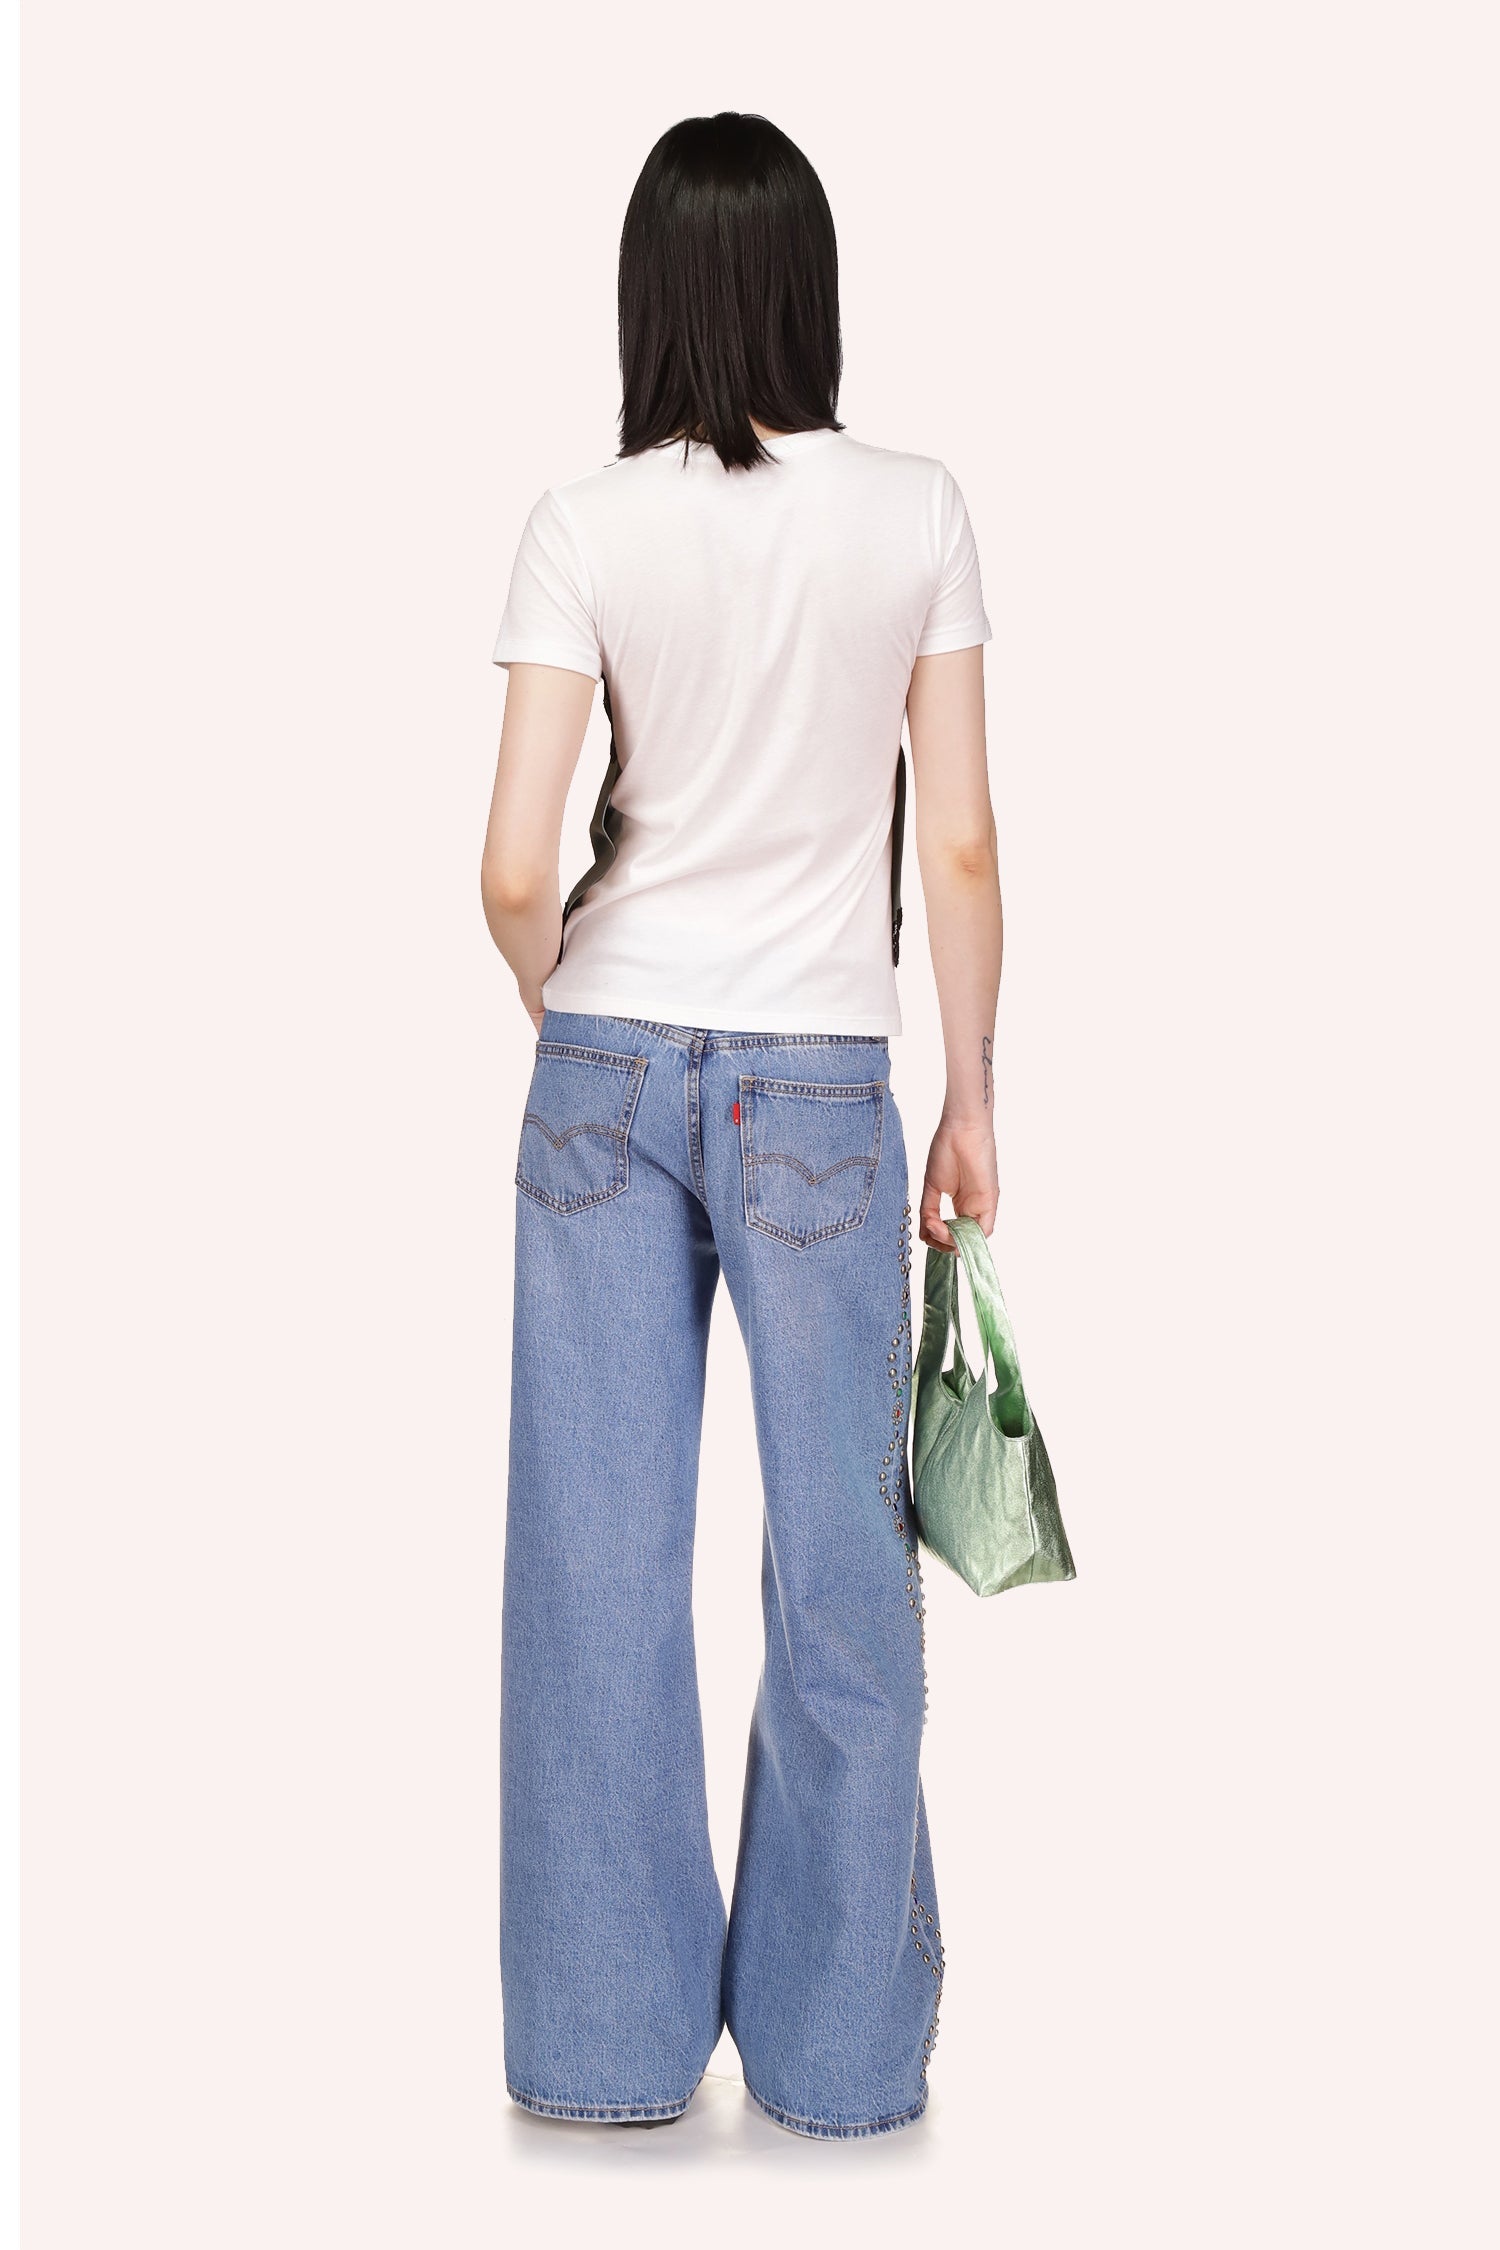 Denim, 2 pockets back typical stiches, wide legs over shoes, oval studded shapes silver/copper